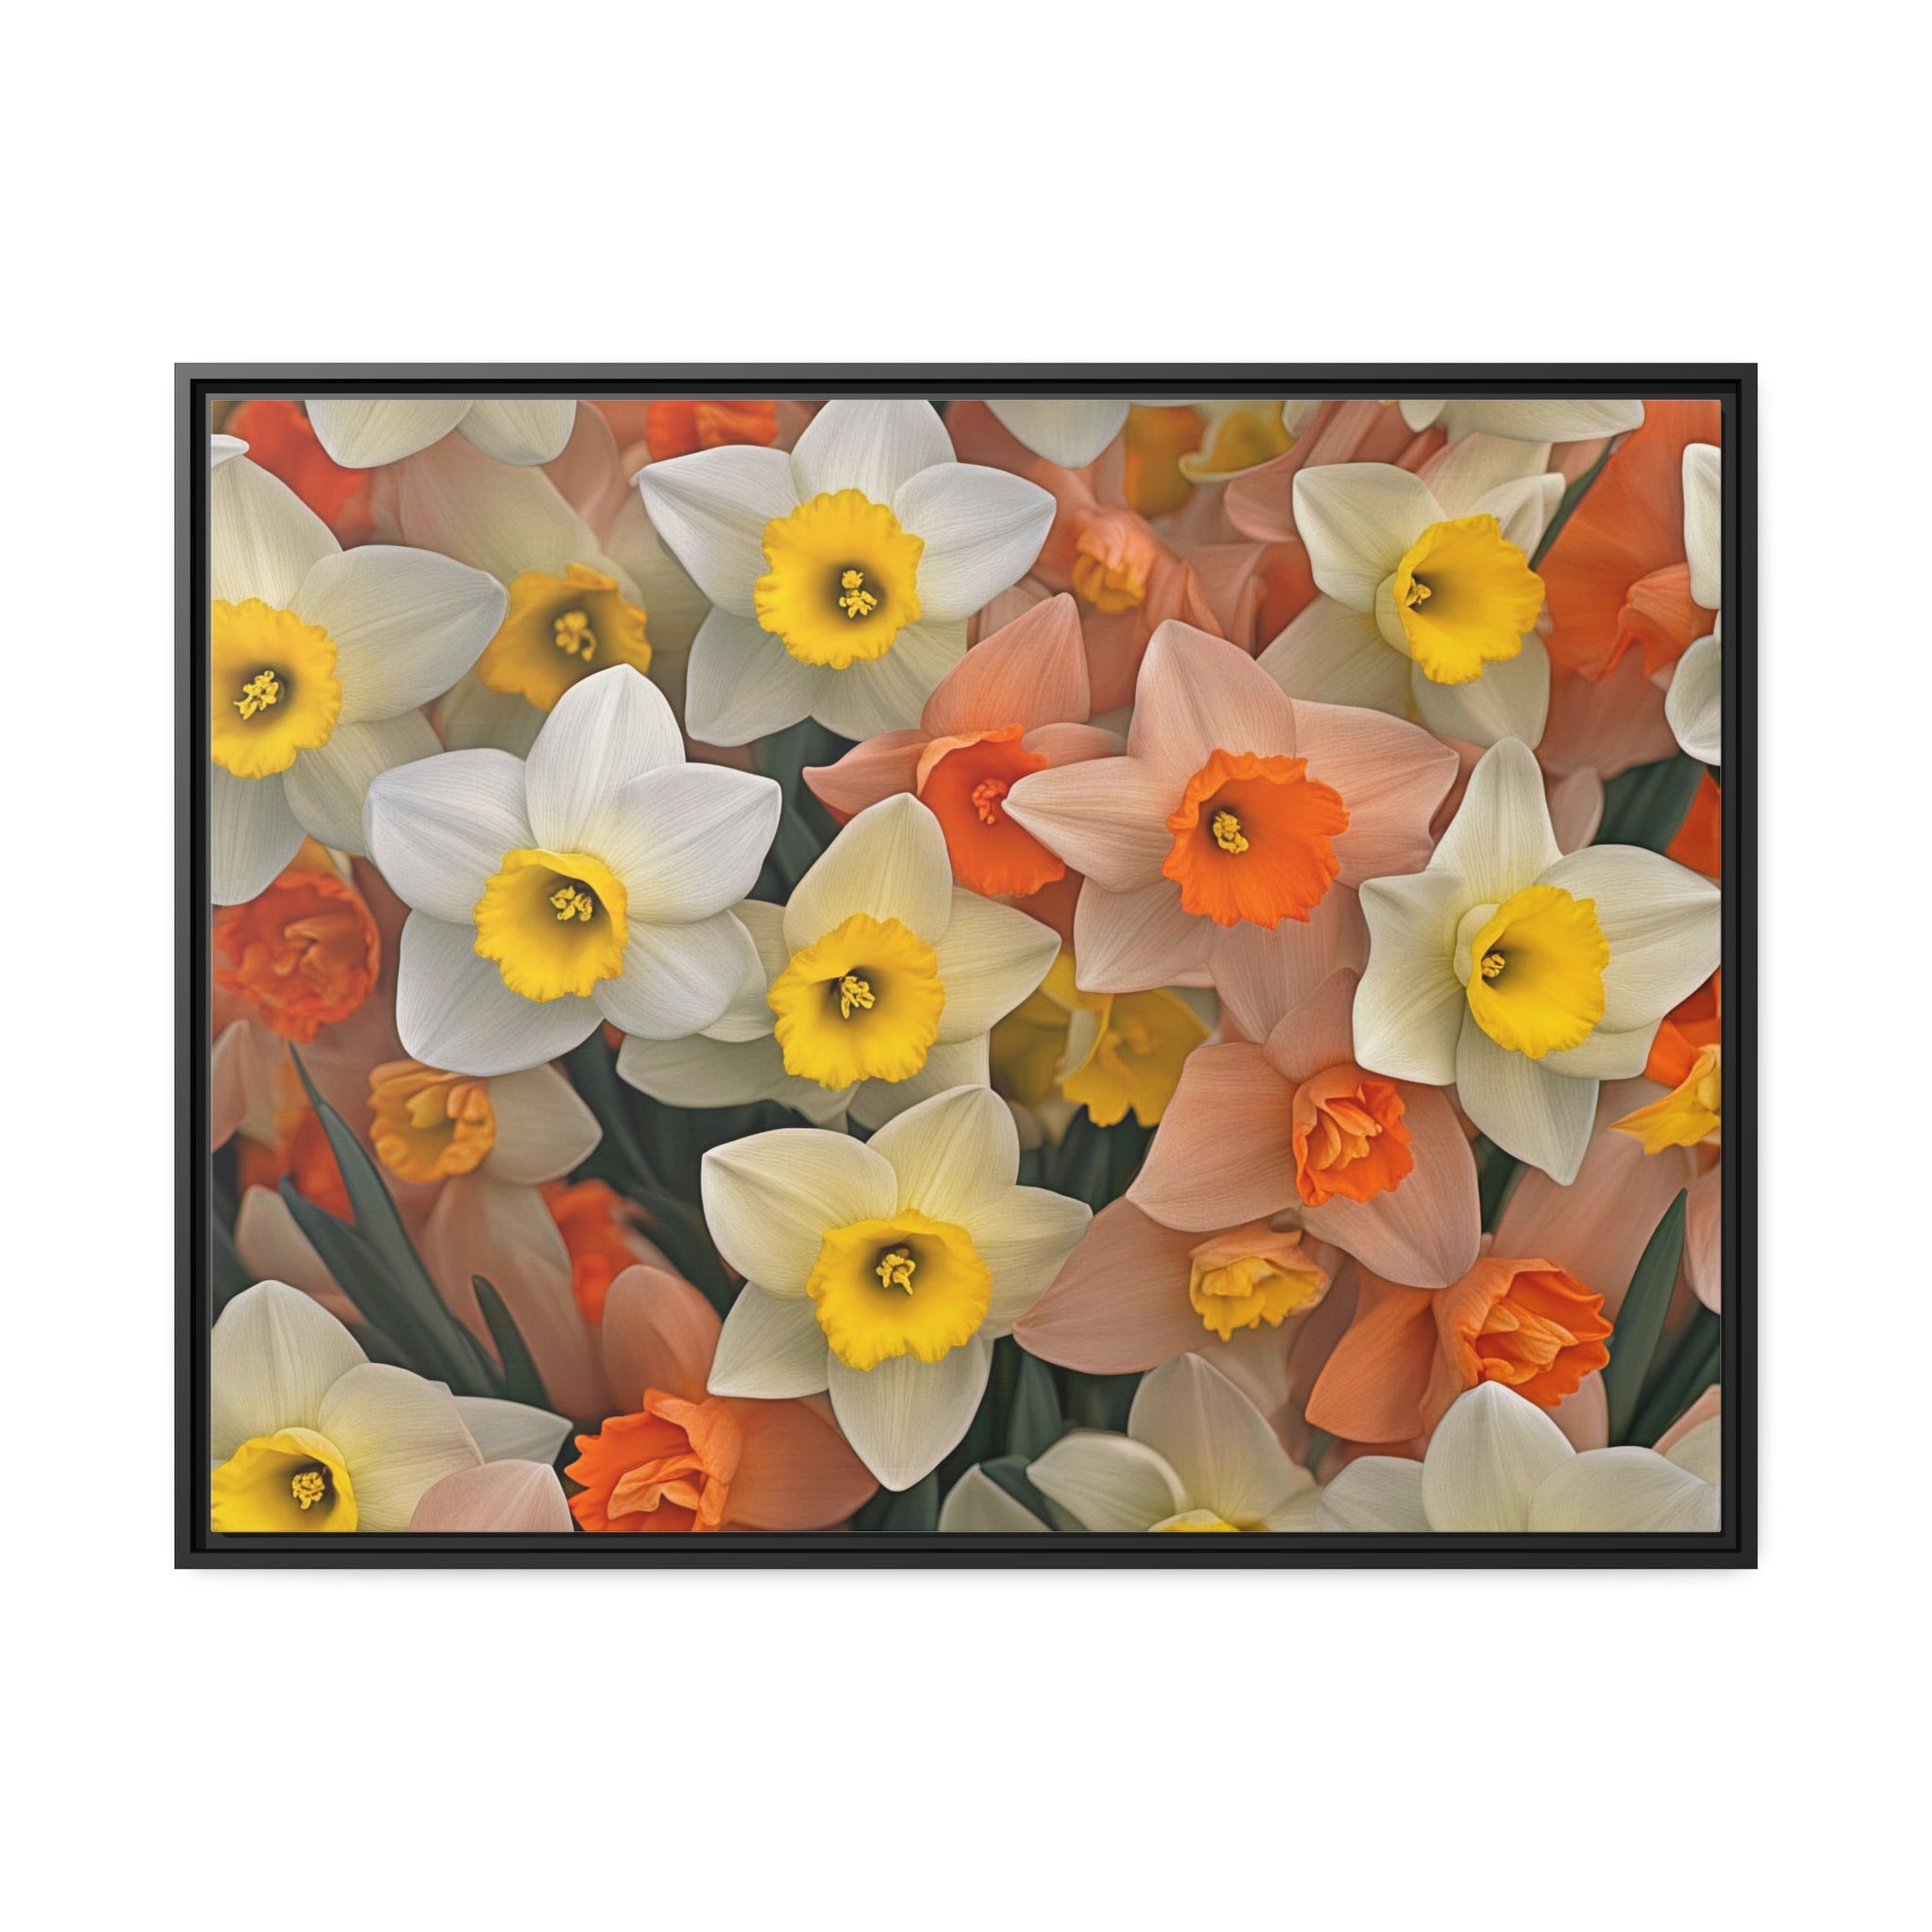 Wall Art DAFFODILS Canvas Print Art Deco Painting Original 40X30 Giclee + Frame Love Flower Minimalist Beauty Fun Design Fit House Office Gift Ready Hang